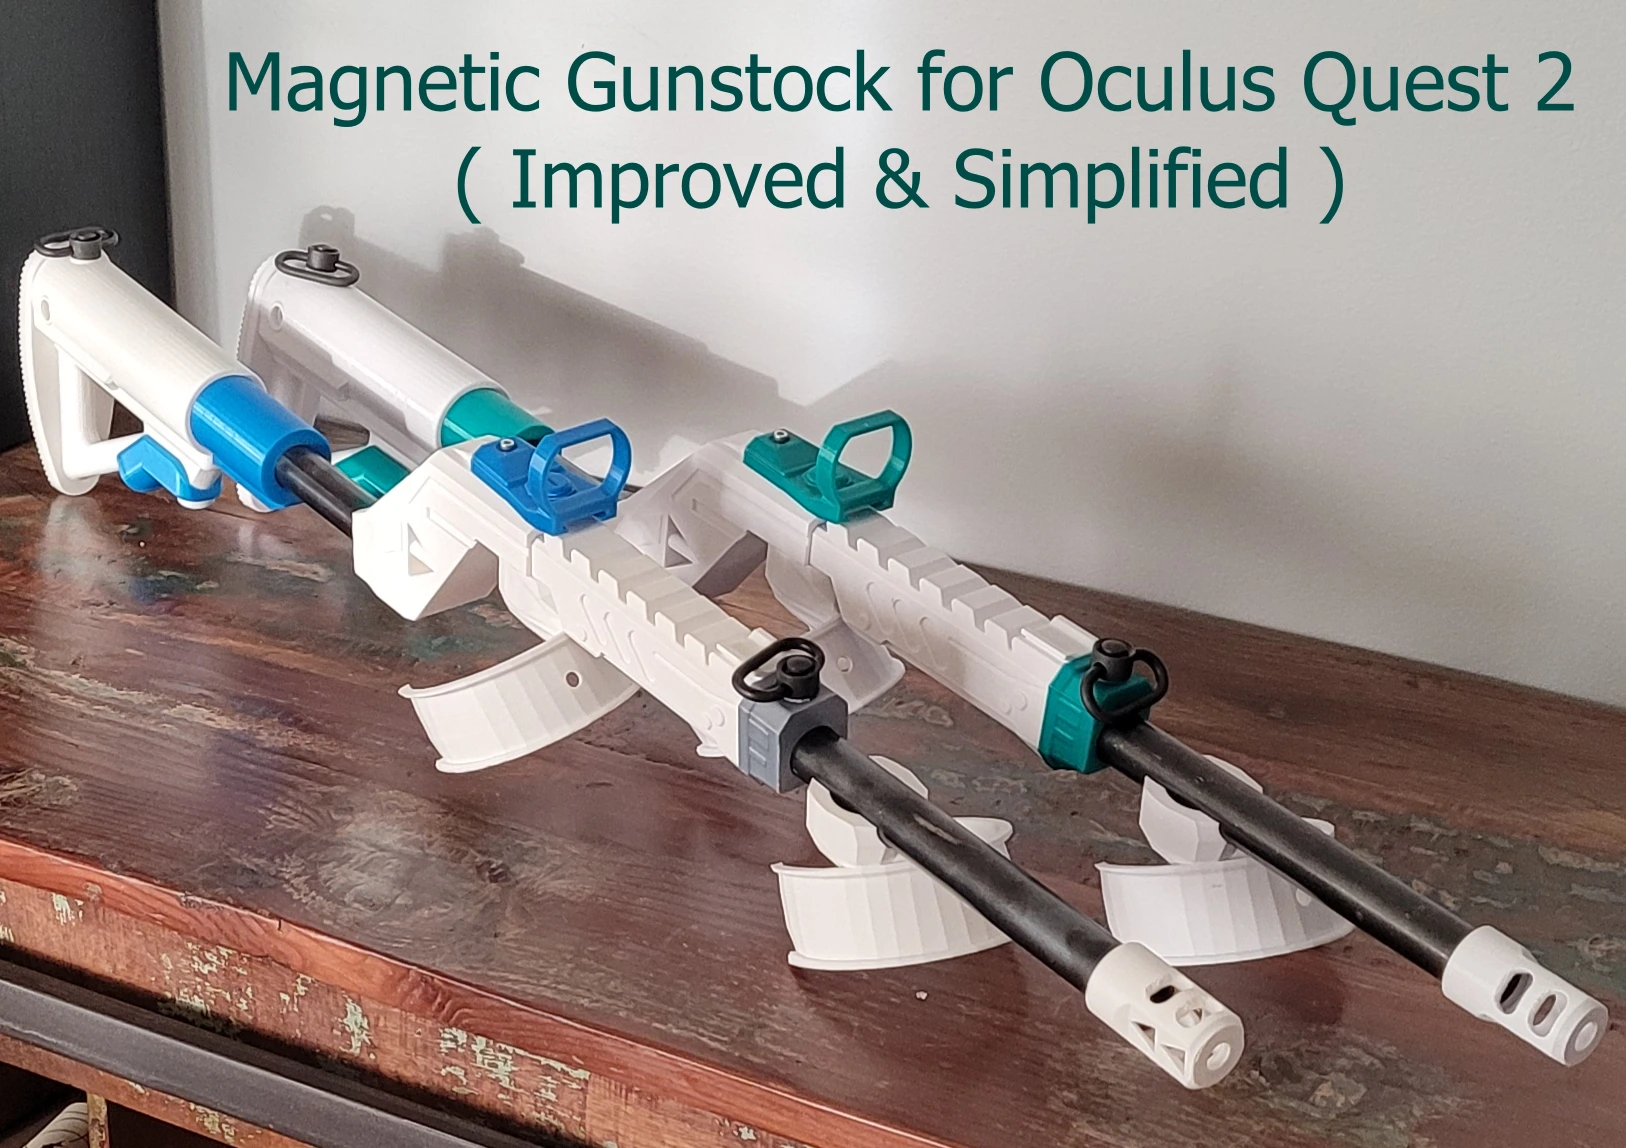 Magnetic Gunstock for Oculus Quest 2 (Improved & Simplified)